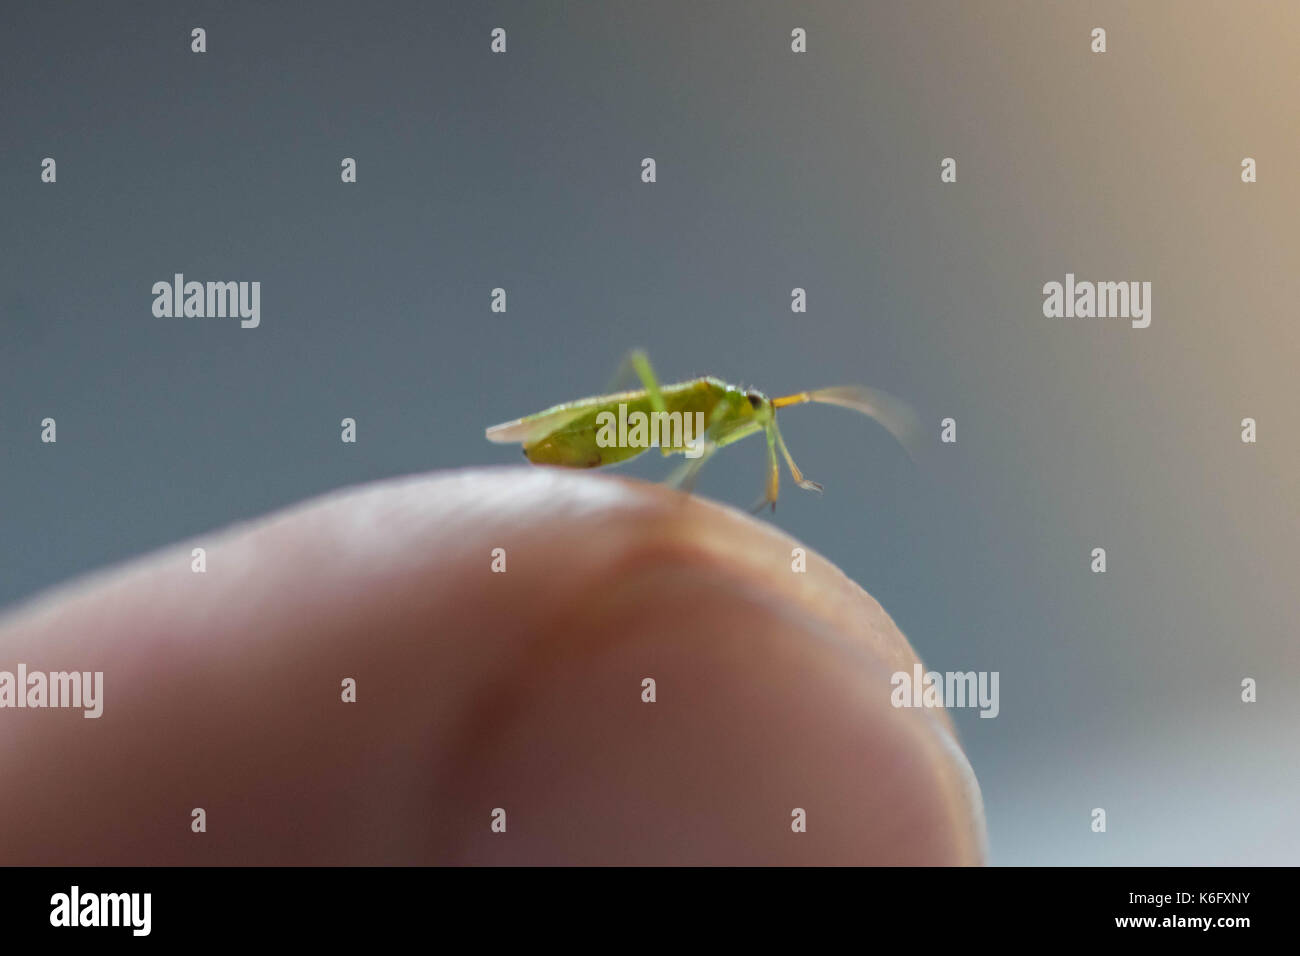 The mosquito is sitting on the finger's joint of the human and getting ready to suck blood. Stock Photo